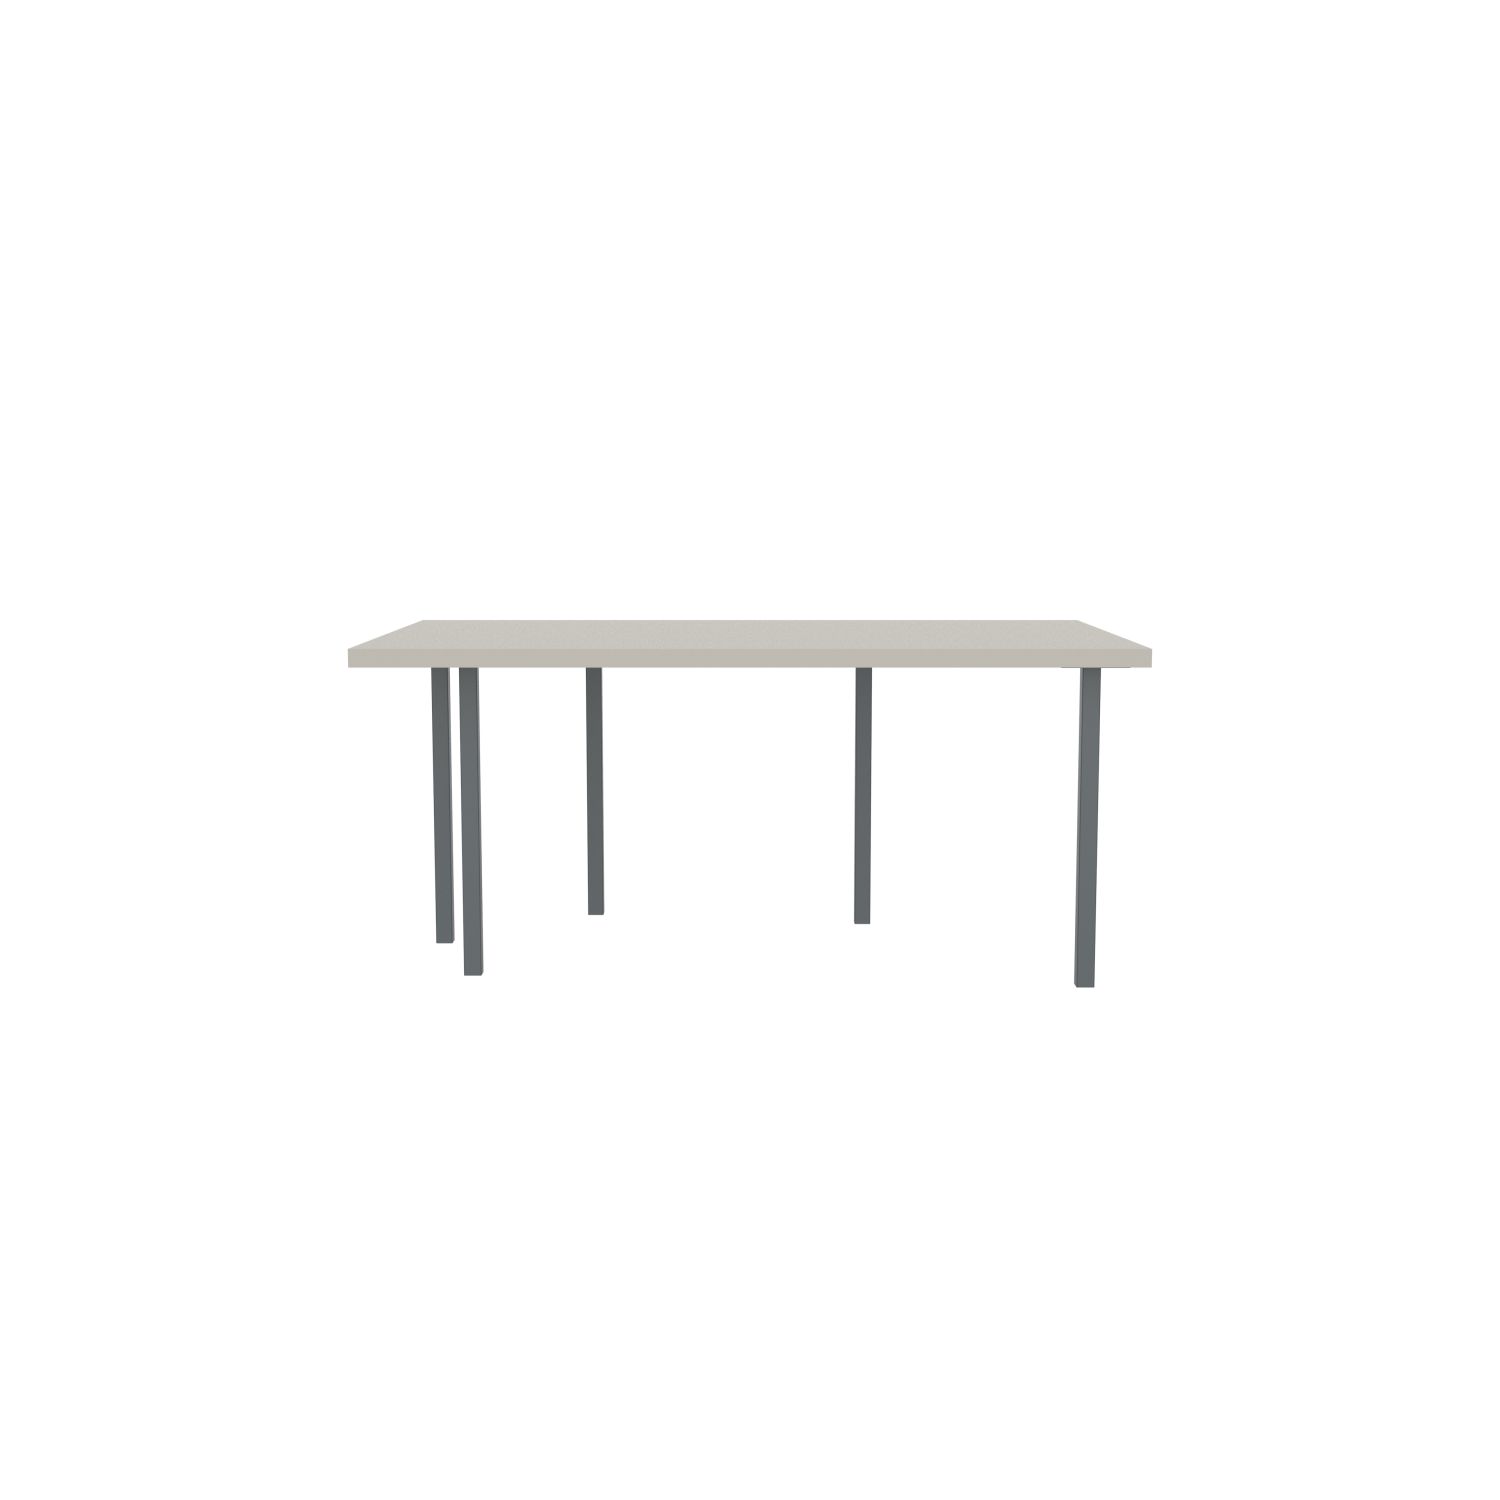 lensvelt bbrand table five fixed heigt 103x172 hpl white 50 mm price level 1 dark grey ral7011